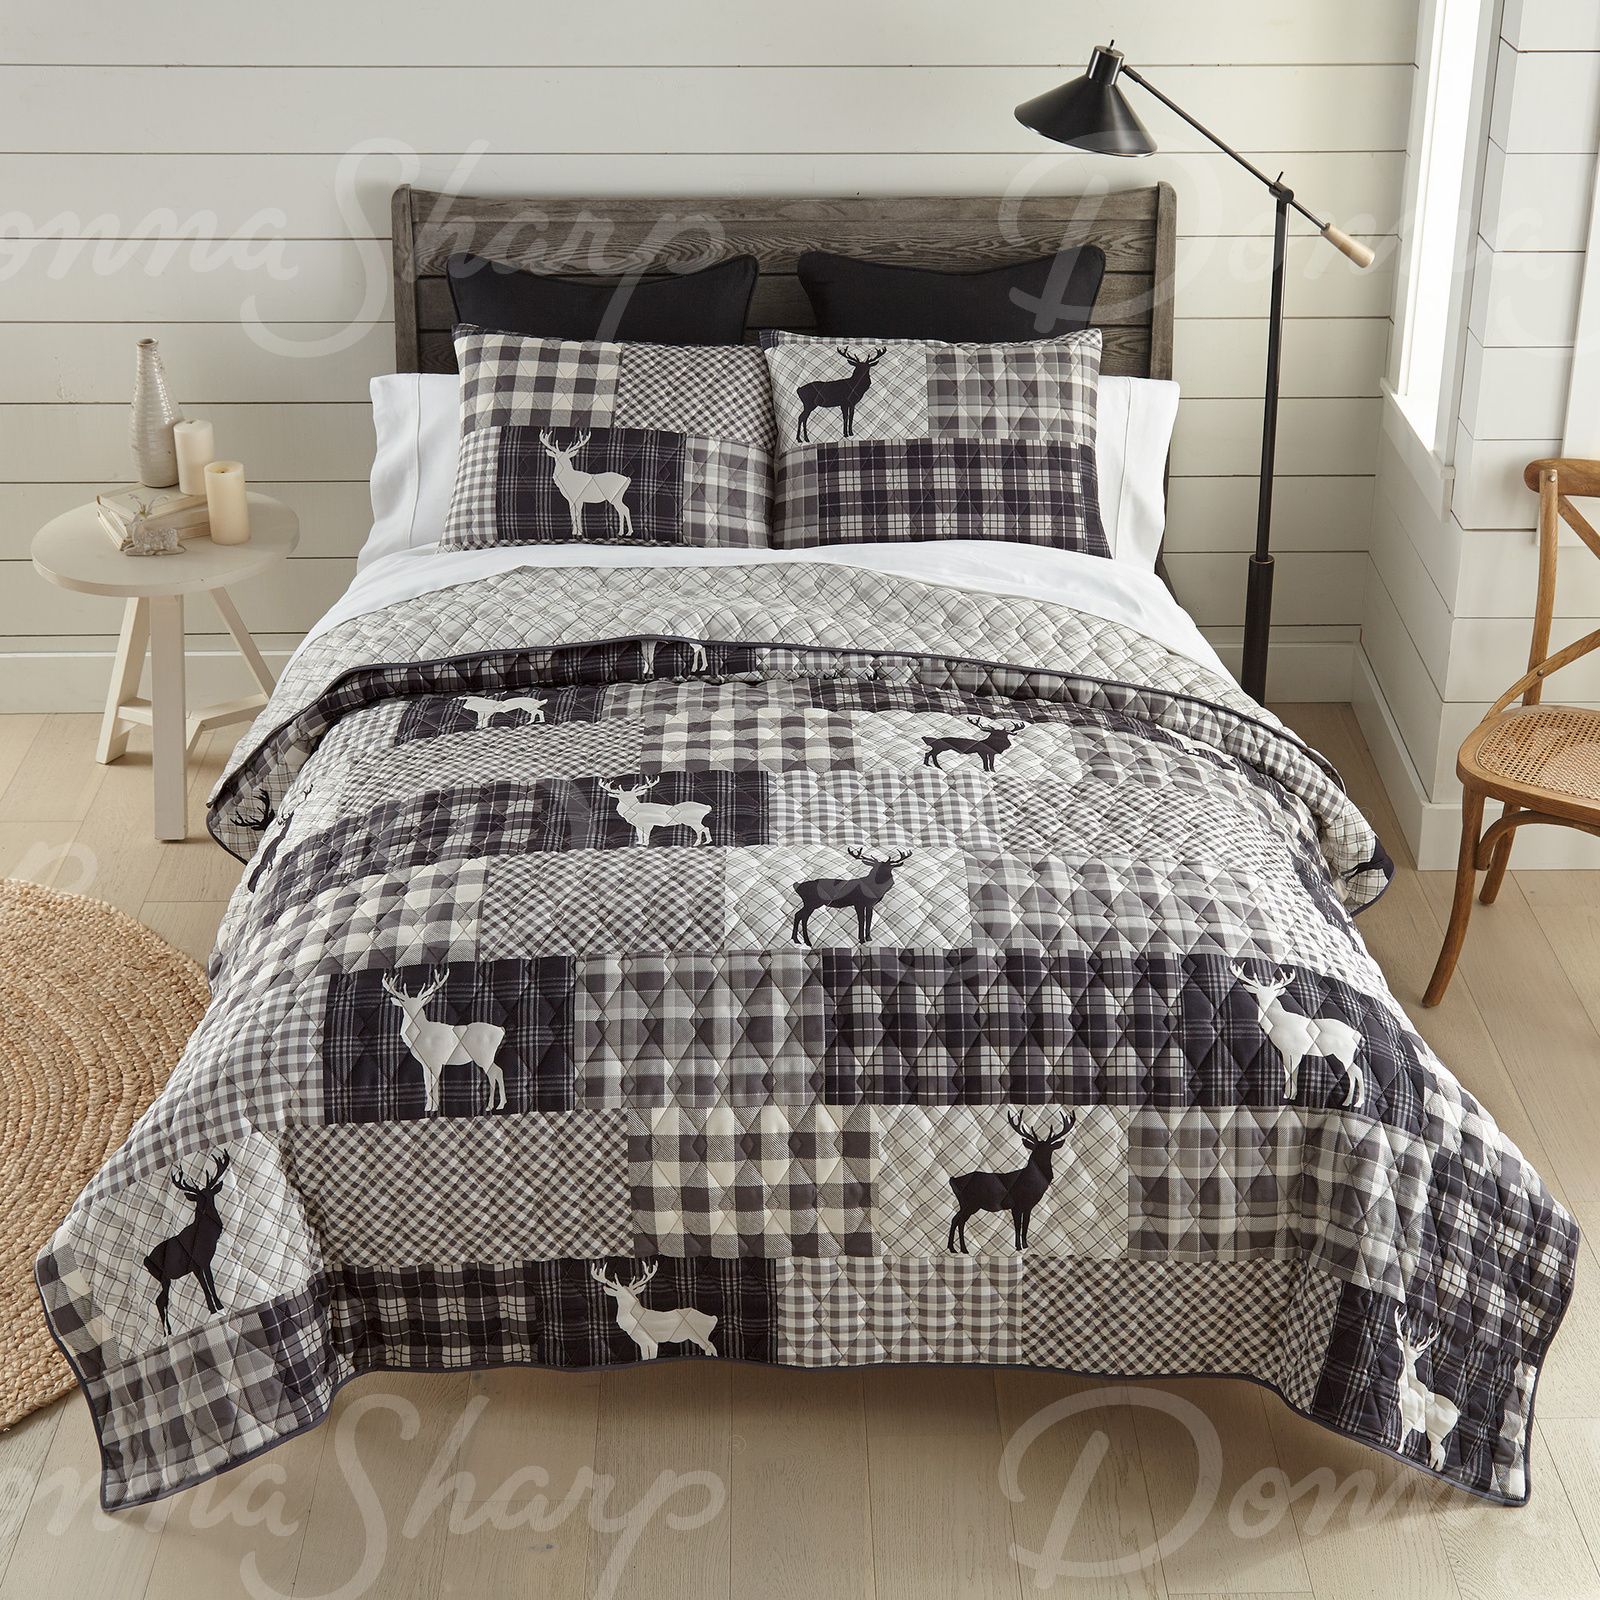 Ridge Point Quilted Bedding Set from Your Lifestyle by Donna Sharp